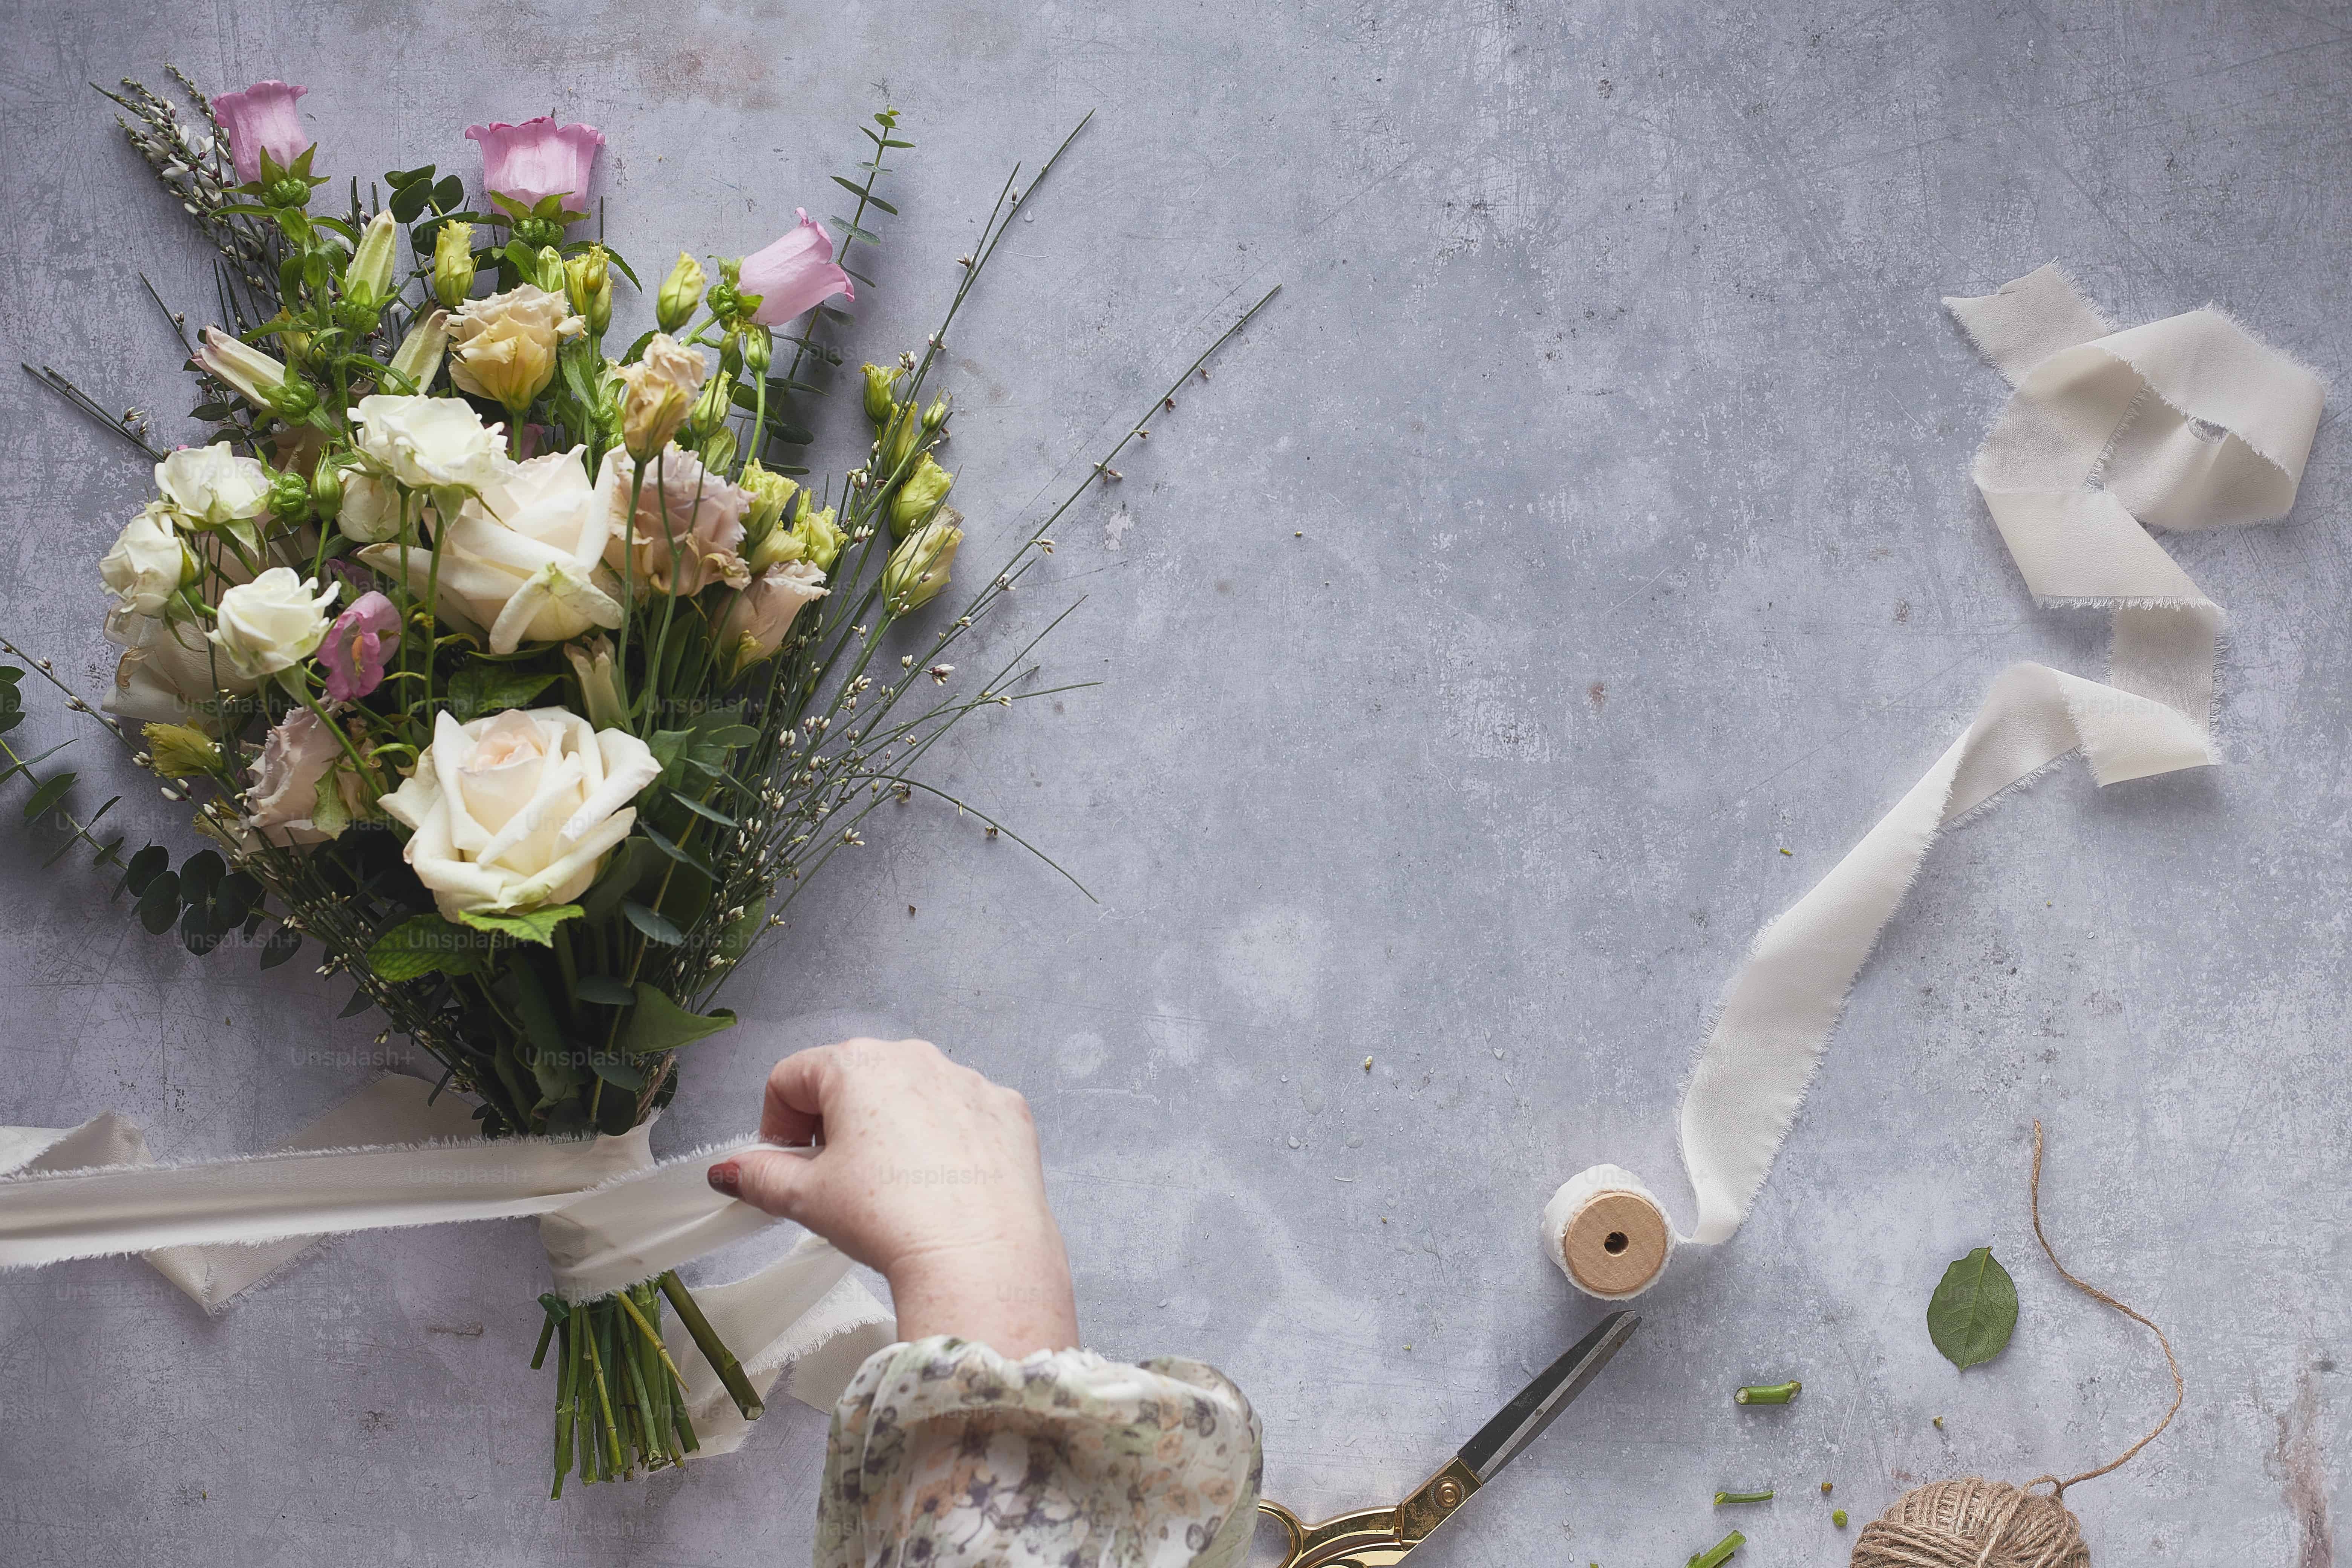 a person holding a pair of scissors next to a bouquet of flowers